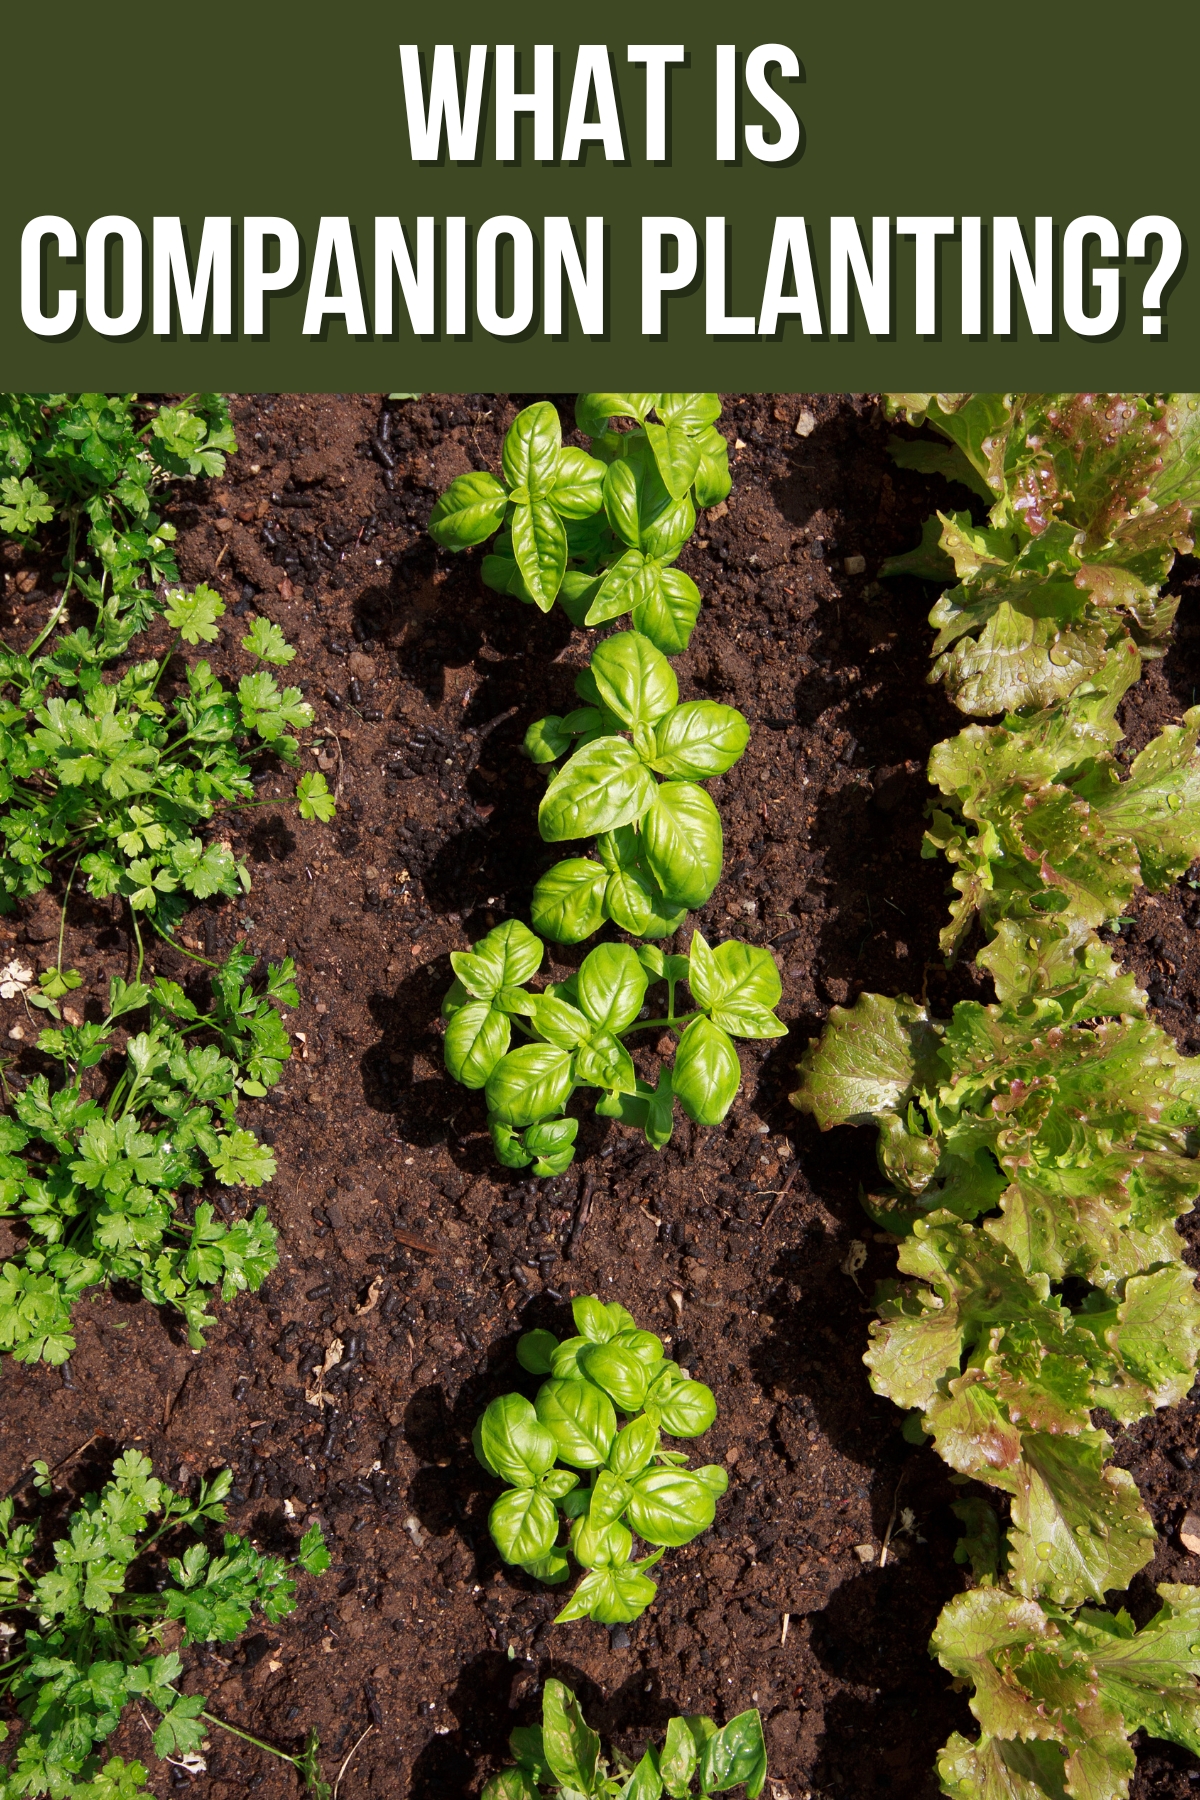 what is companion planting? text overlay on image of vegetable and herb garden